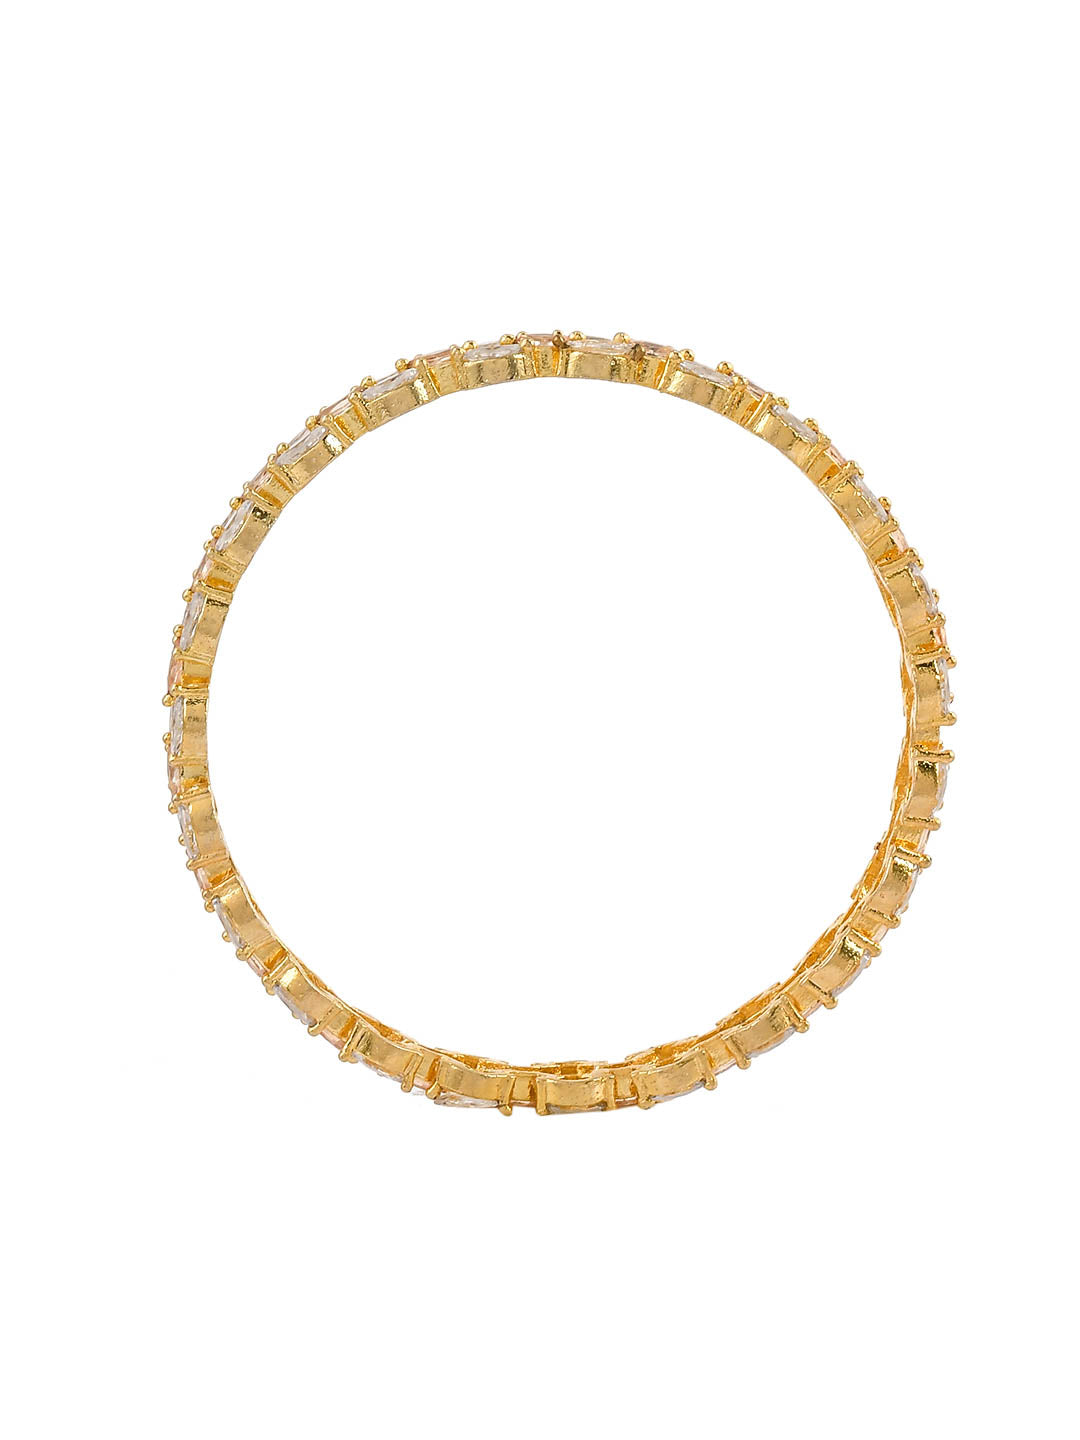 Gold Plated American Daimond Marquisite Bangle Set Of 2